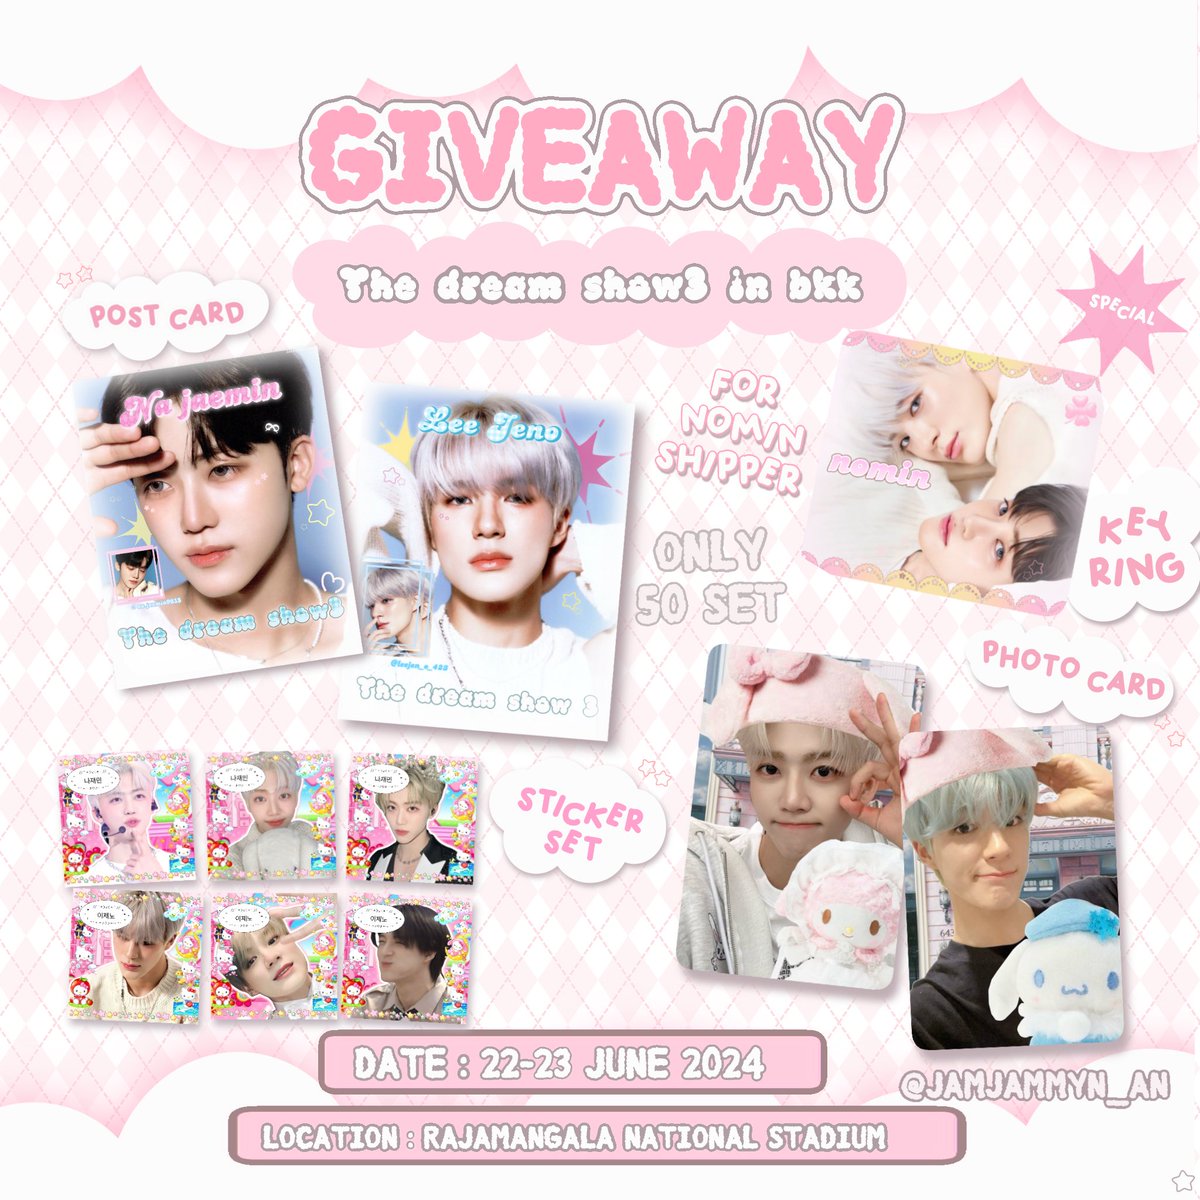 🎀— pls kindly rt ౨ৎ︎
giveaway for dreamzen ˖ ࣪🍮
50 set 💭
•post card 50ea
•photo card 50ea
•sticker 50 set
special for nomin shipper🐱
— key ring nomin

date : 22-23 june 2024🍡
location: @ rajamangala stadium 

#NCTDREAM_THEDREAMSHOW3_in_BKK #NCTDREAM_THEDREAMSHOW3inBKK